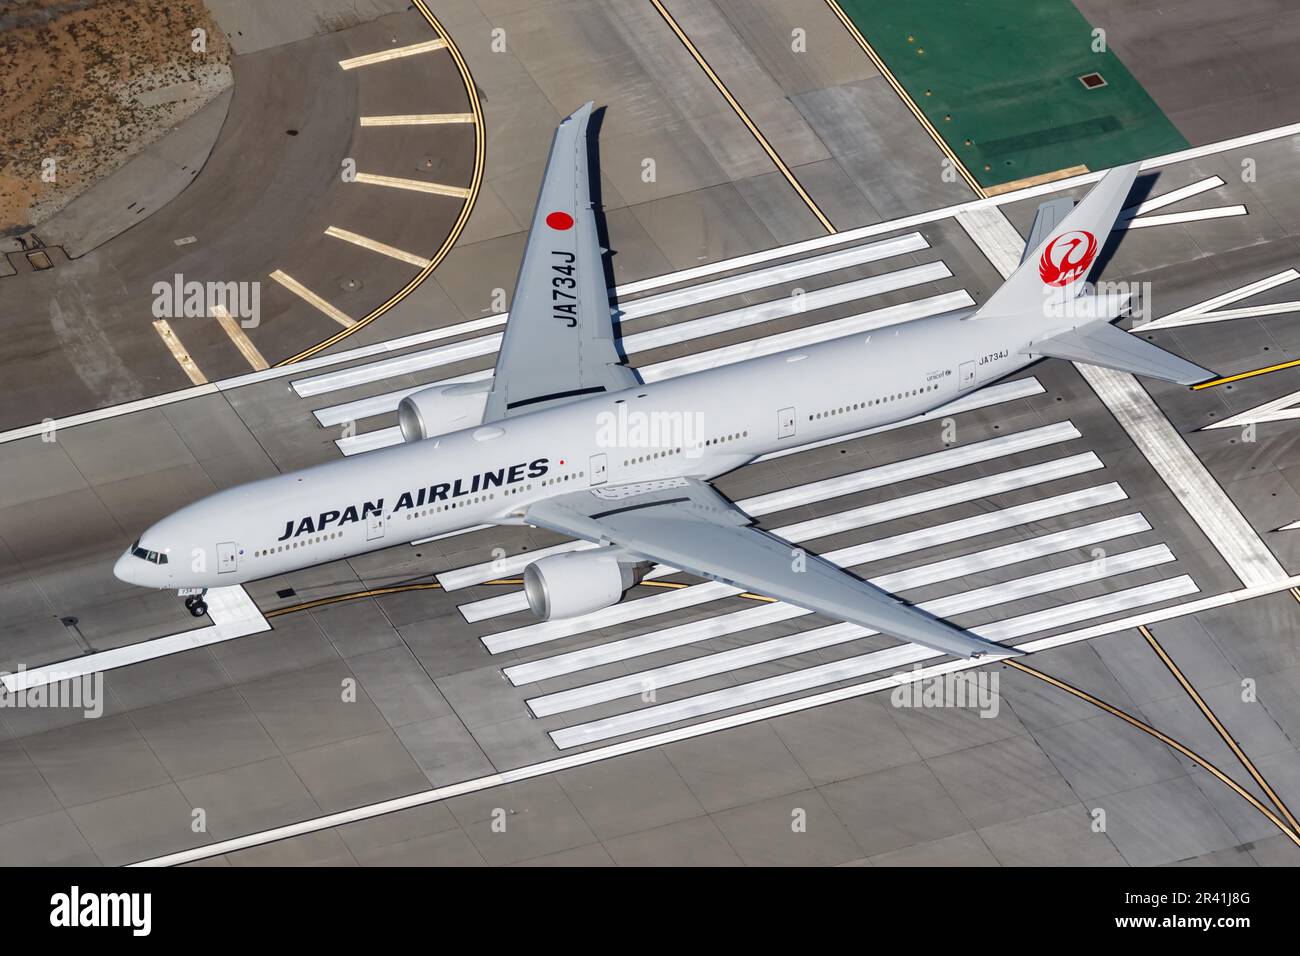 Japan Airlines Boeing 777-300(ER) aircraft Los Angeles airport in USA aerial photo Stock Photo